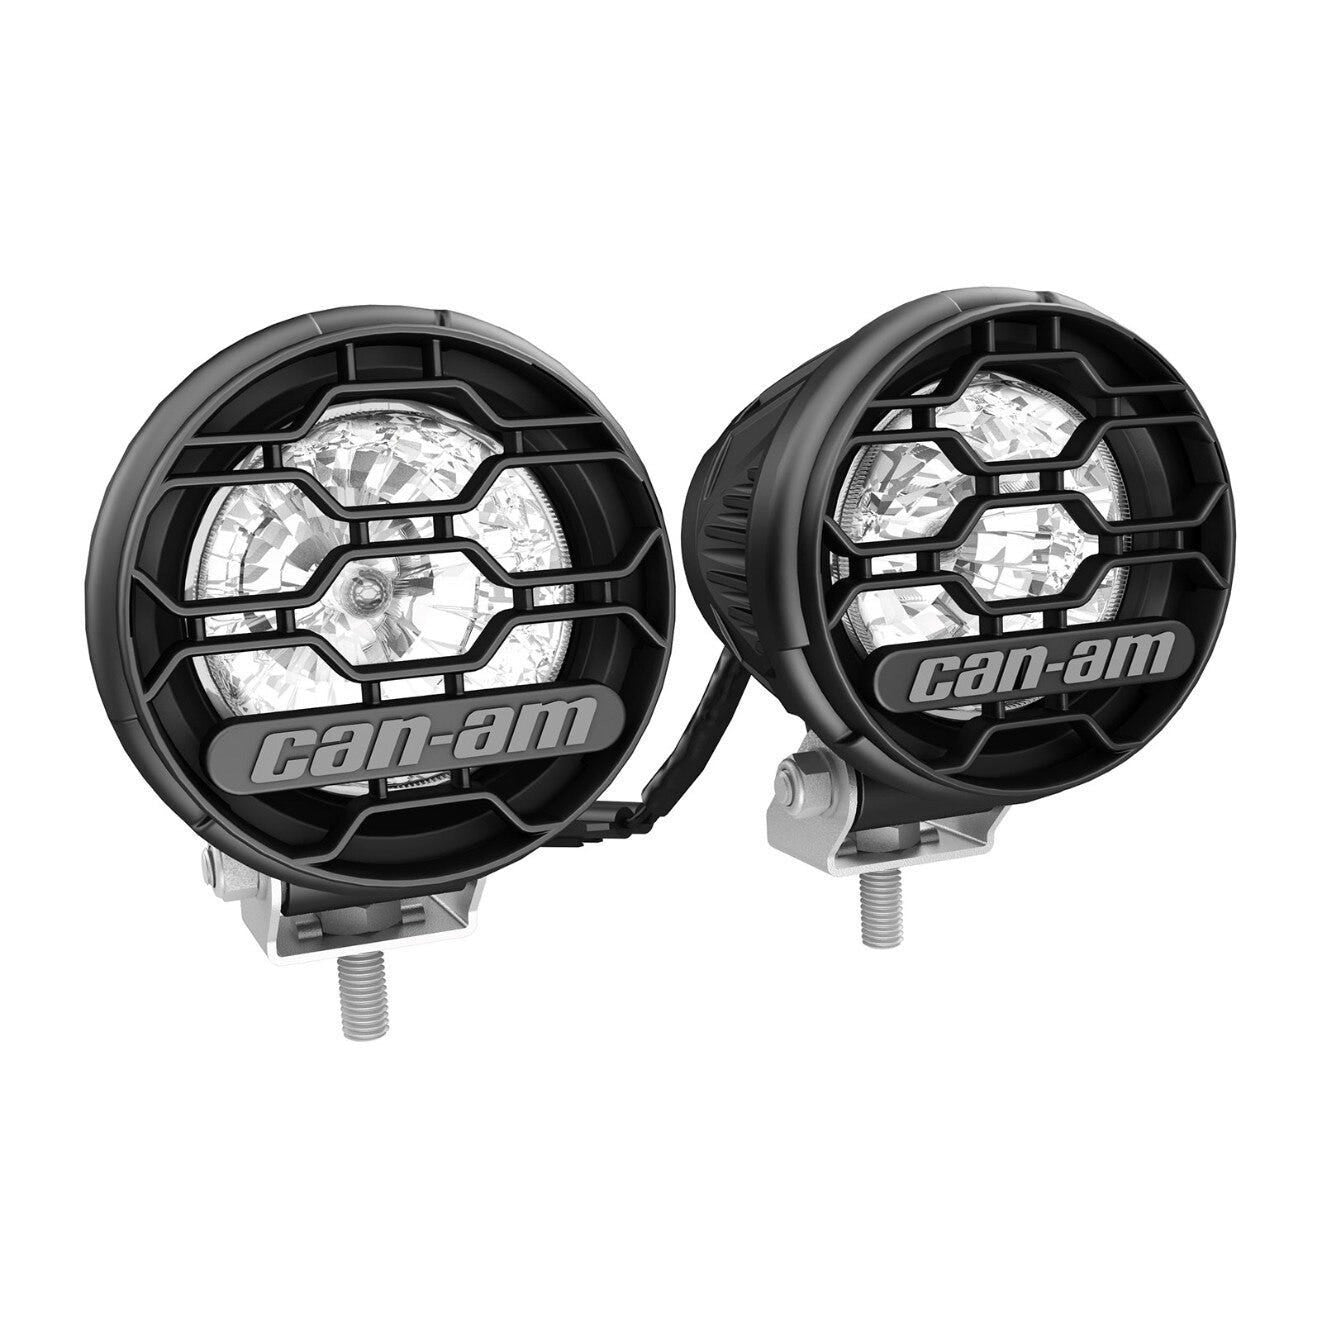 Can-am 4" (10 cm) Round LED Lights (2 x 25W) 715002935 - The Parts Lodge